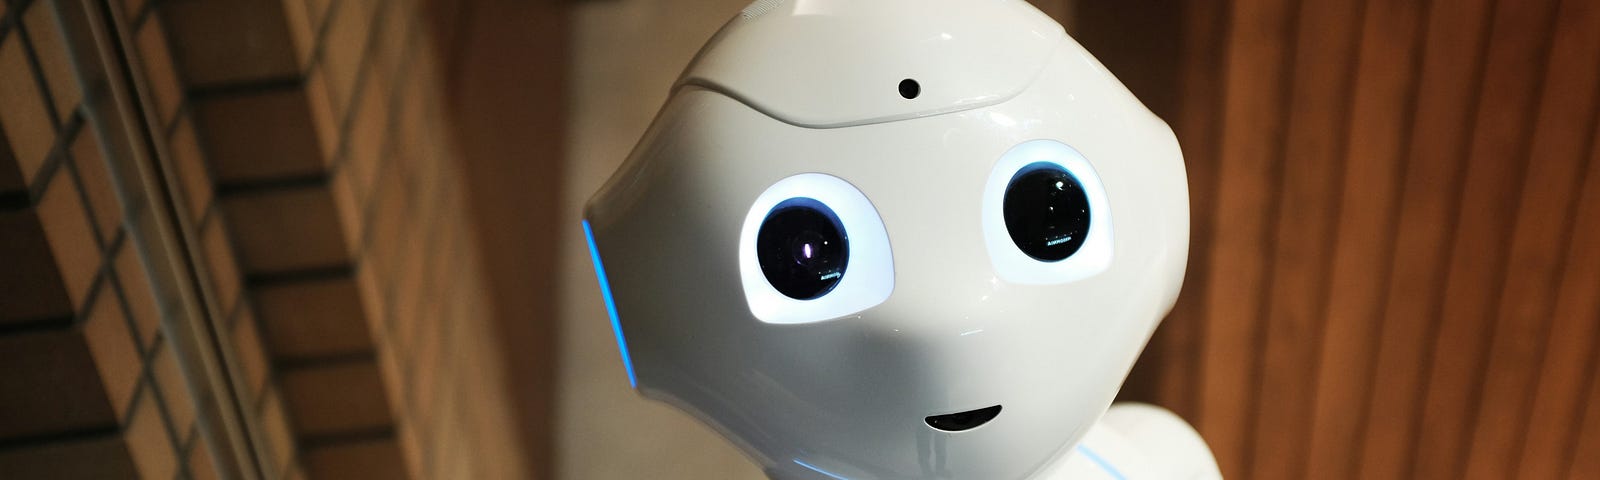 An image of a white robot looking at the screen.